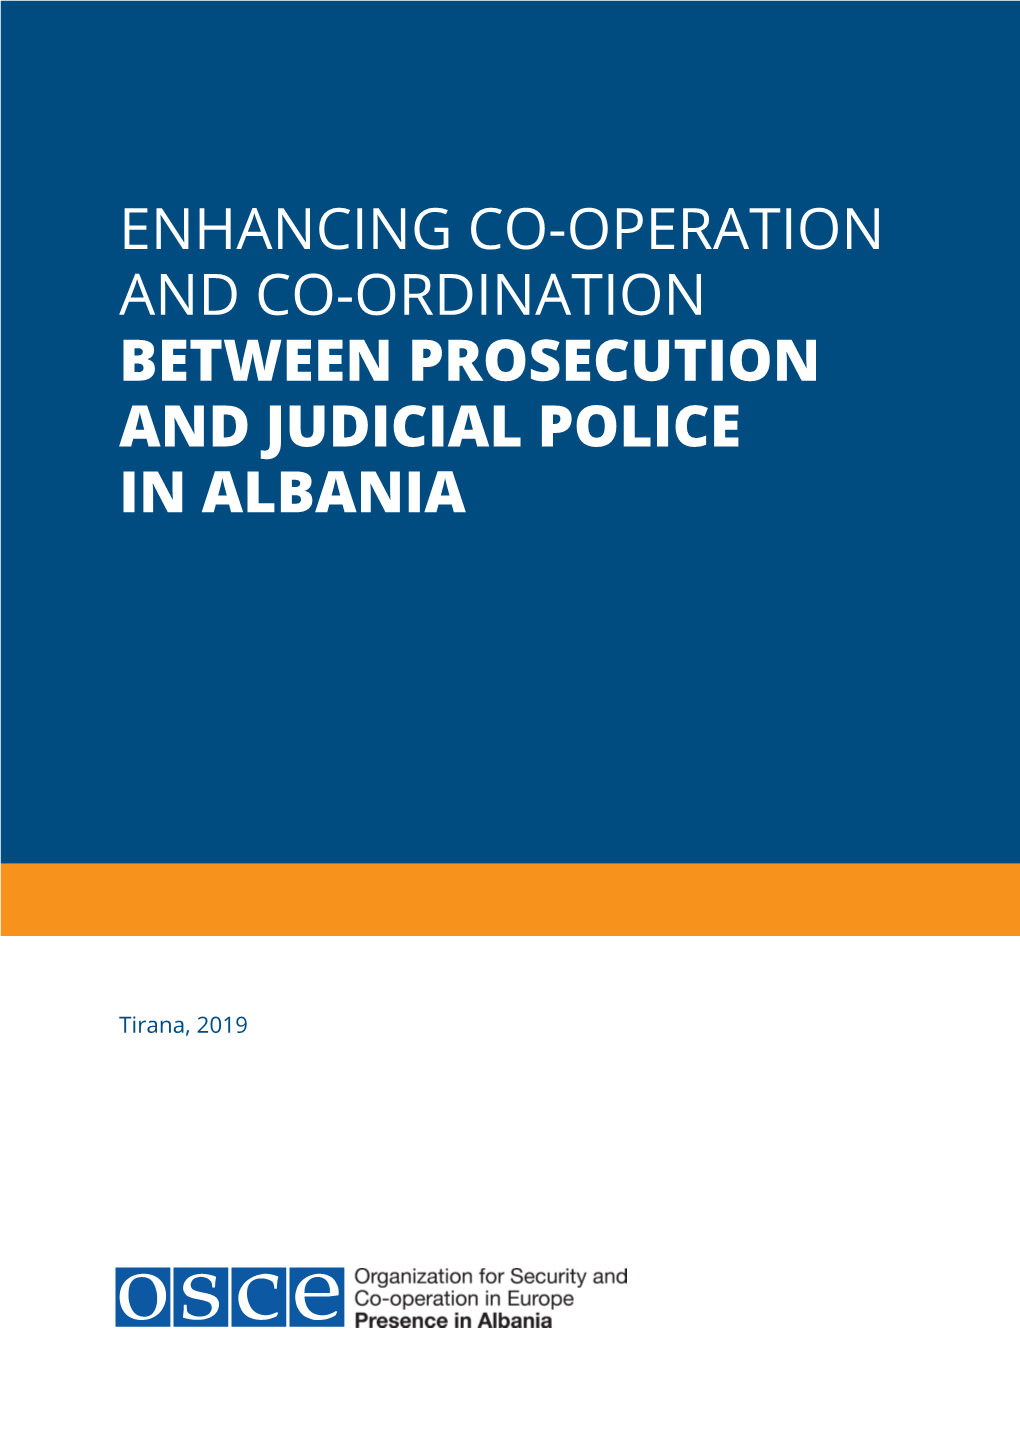 Enhancing Co-Operation and Co-Ordination Between Prosecution and Judicial Police in Albania